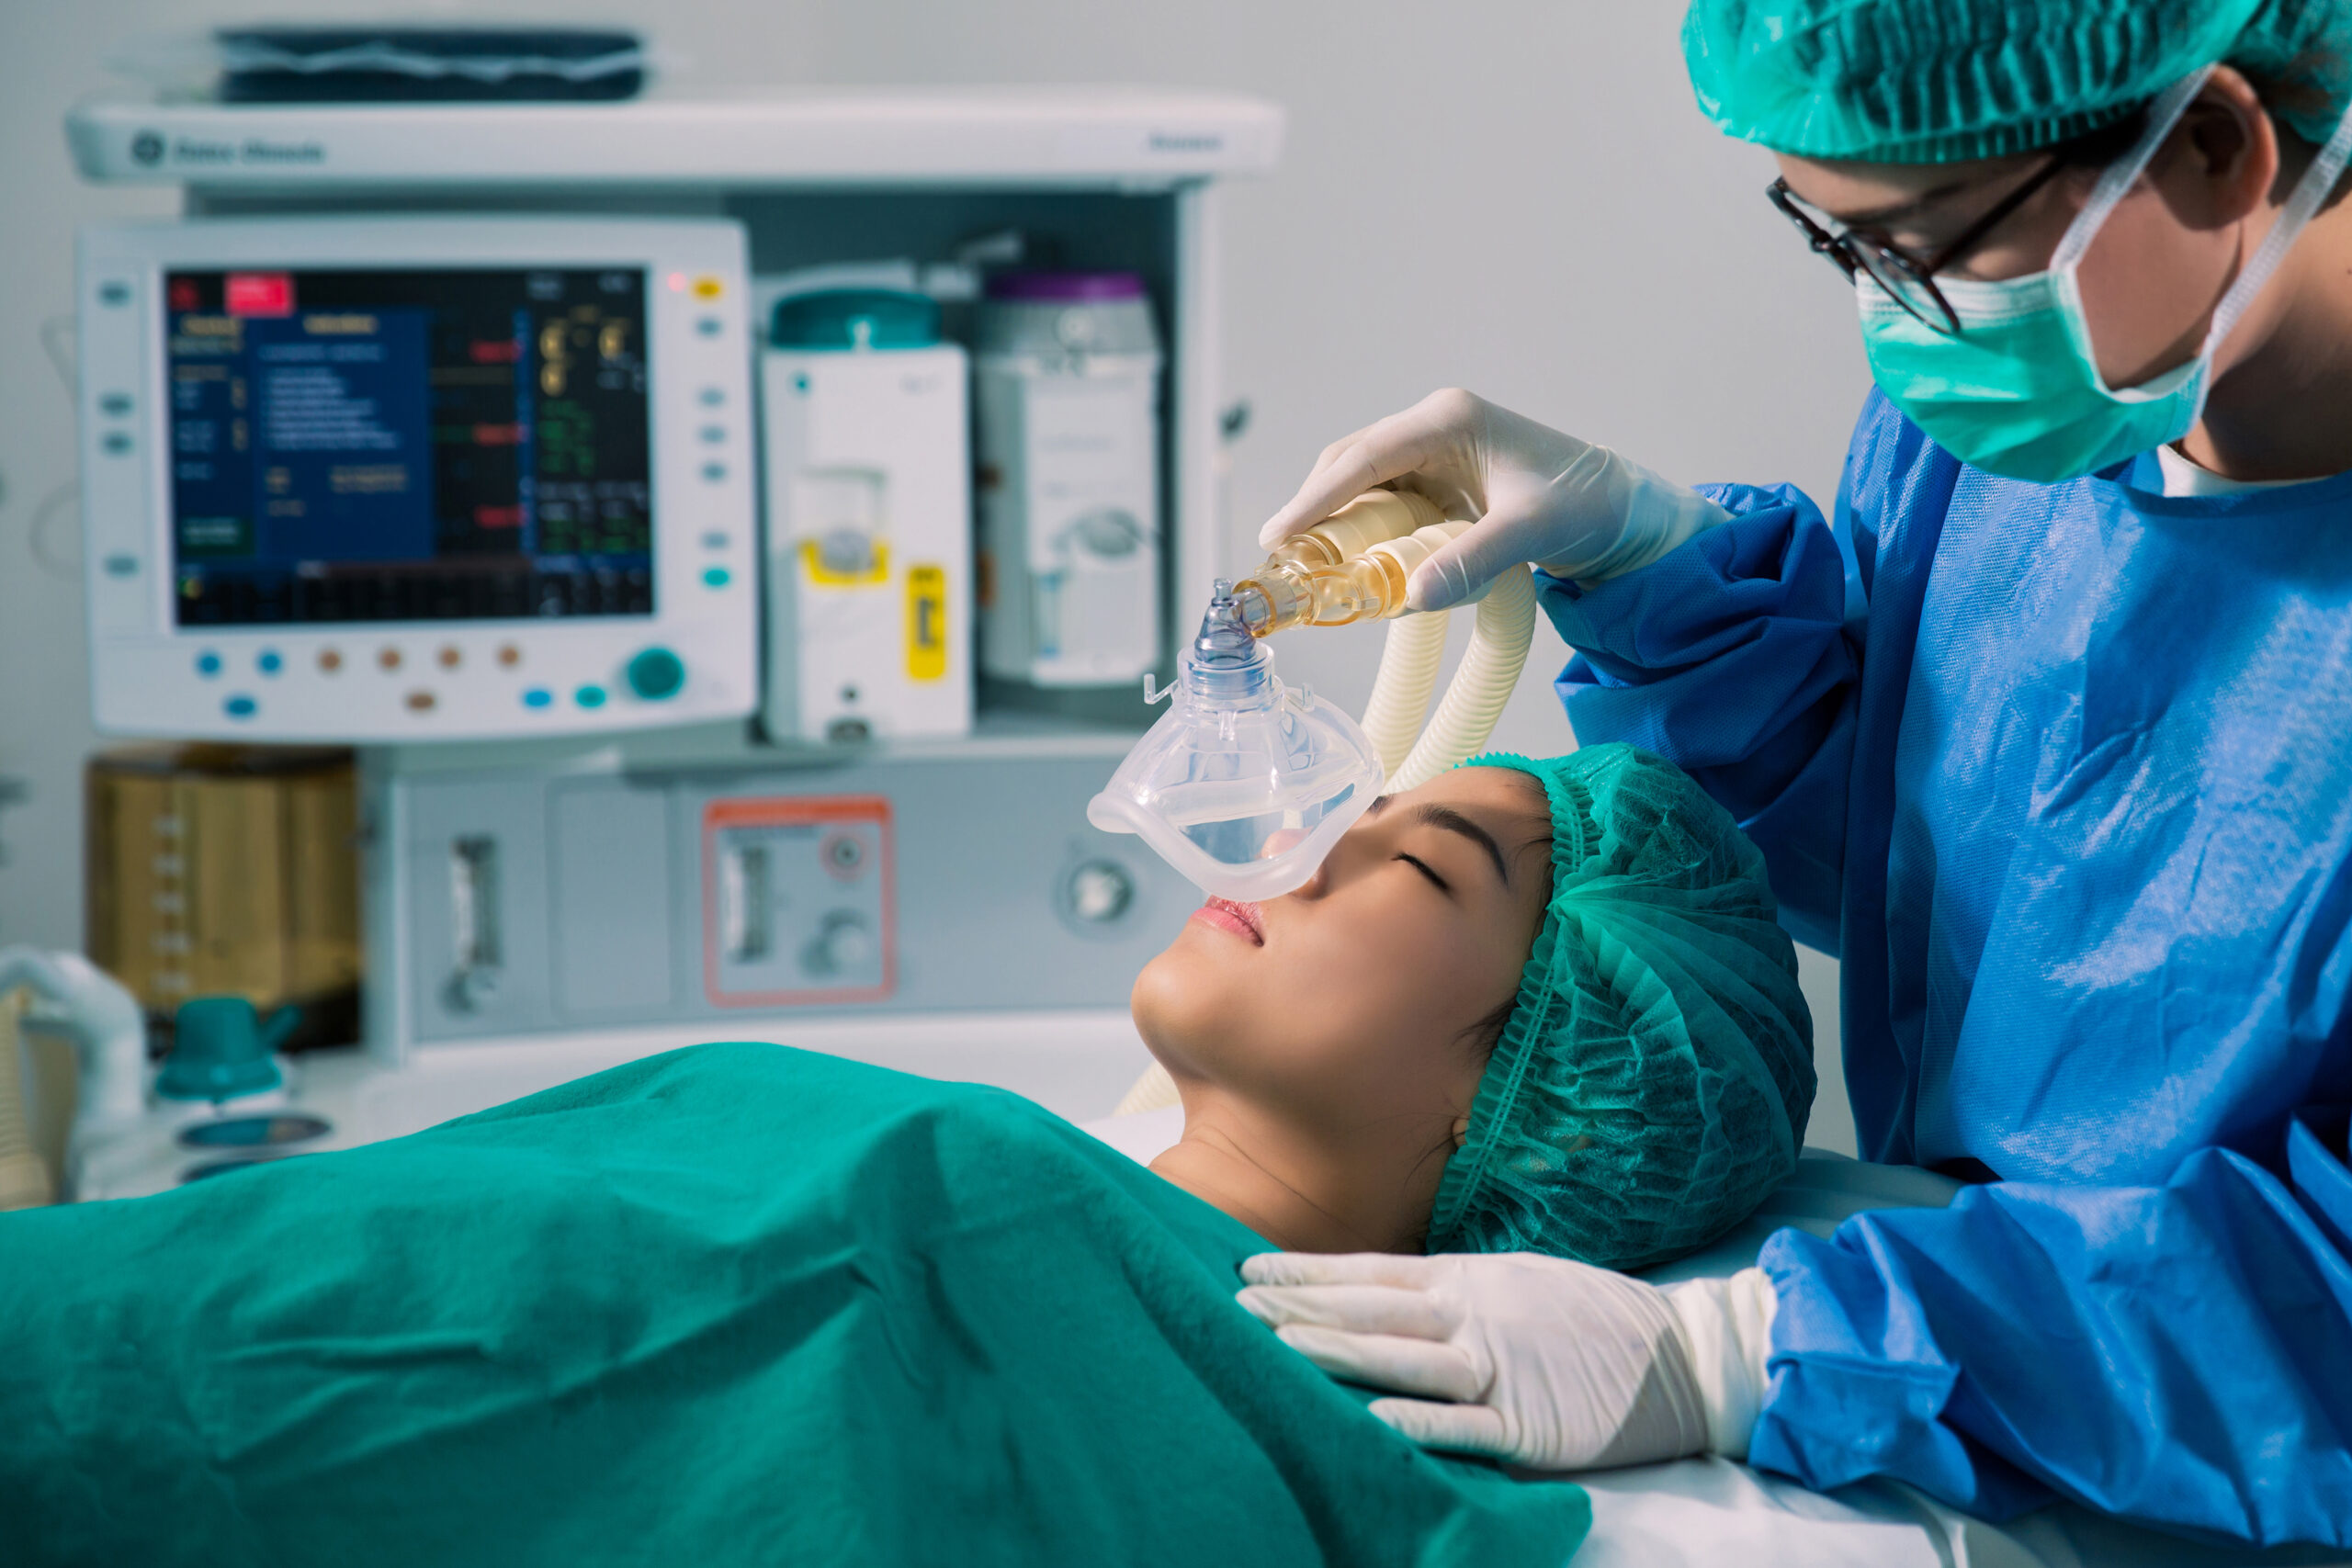 4 Important Things To Know About Anesthesia